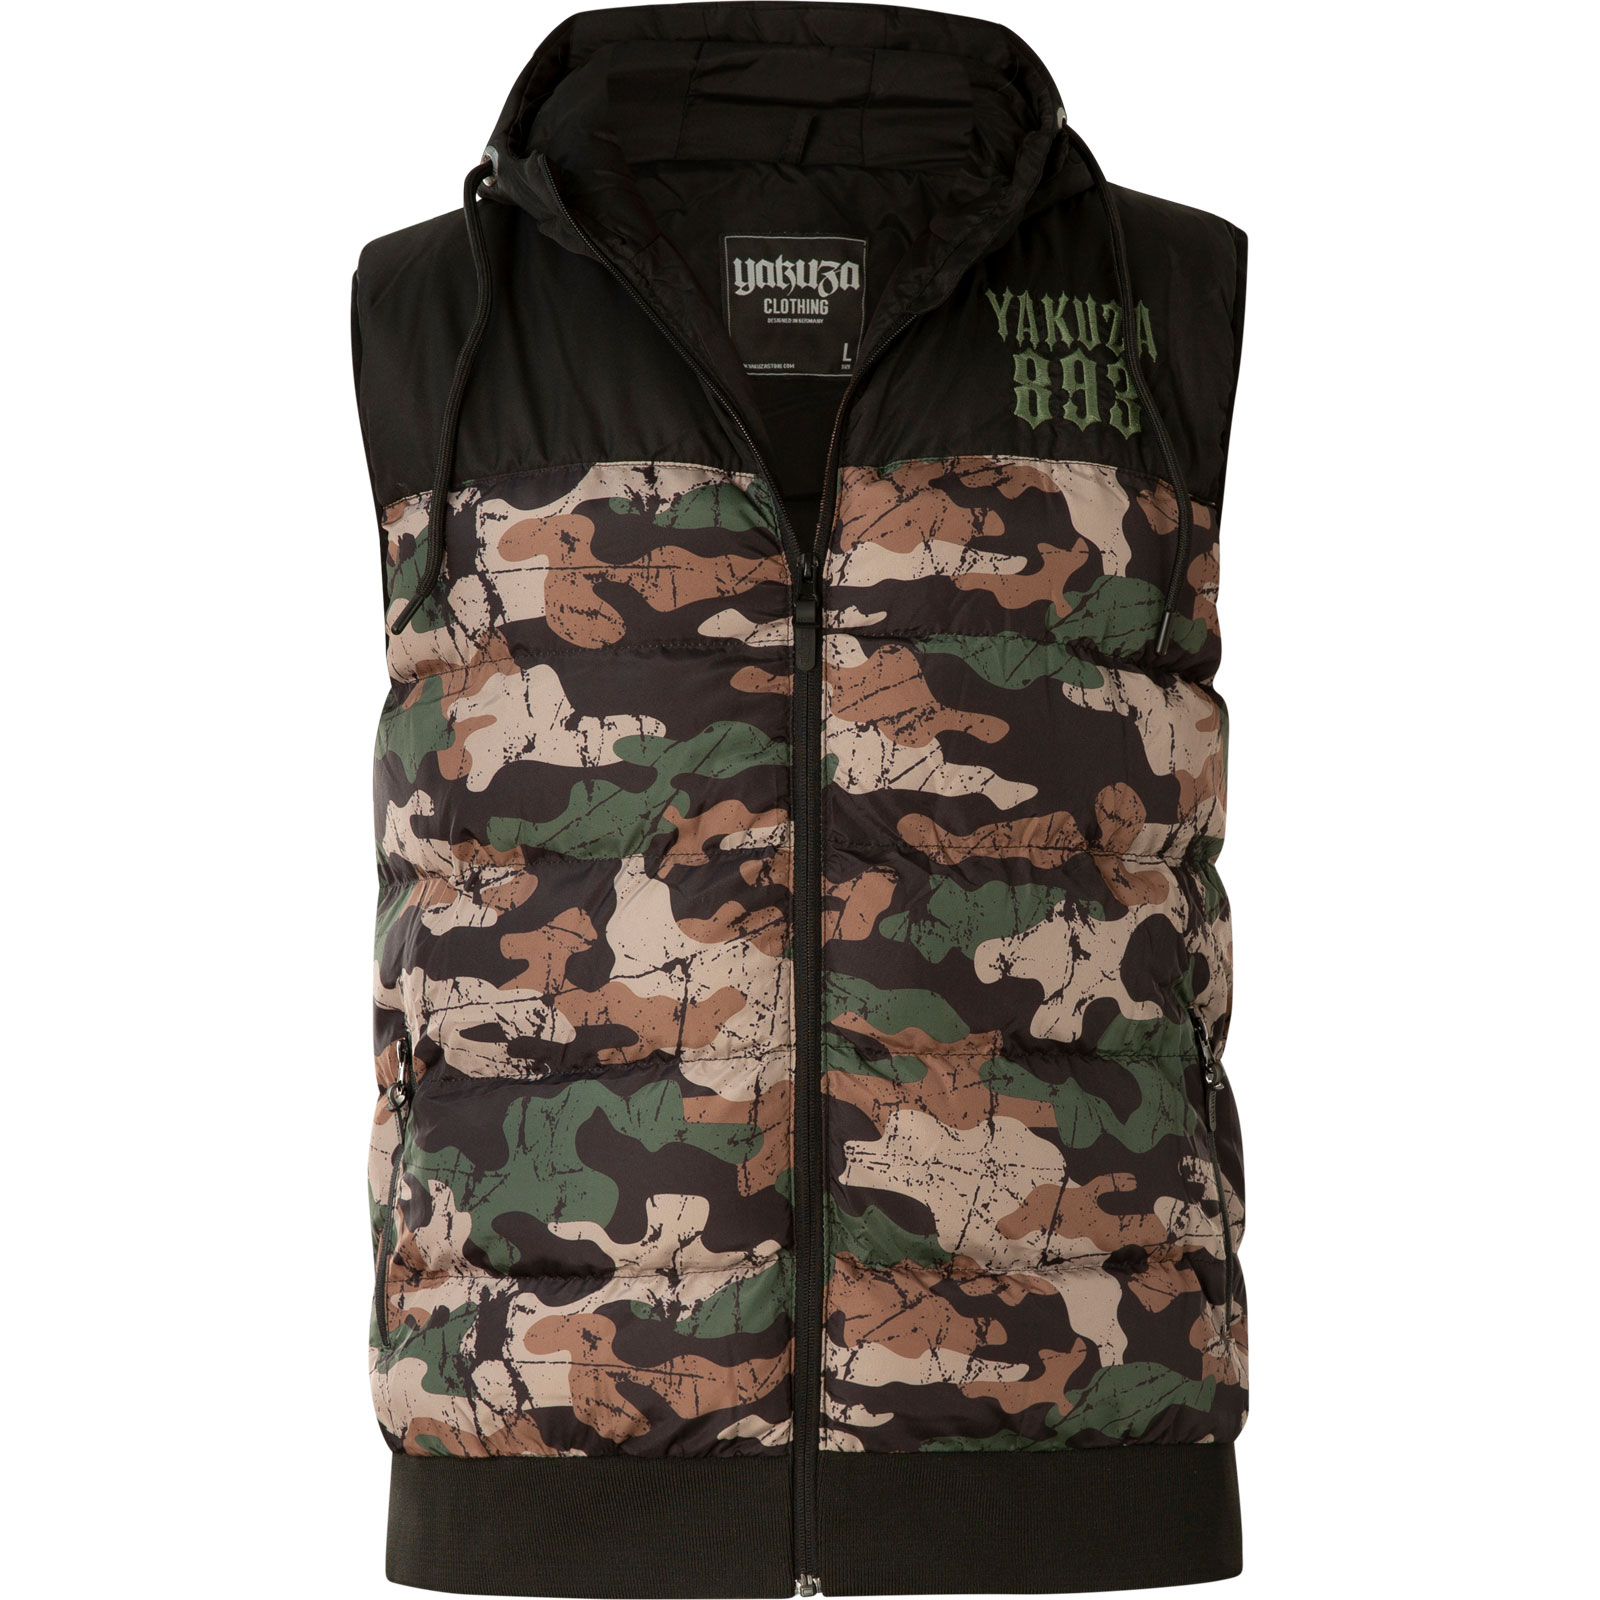 Yakuza Fck Society Quilted Hooded Vest VB-18035 with applications and ...